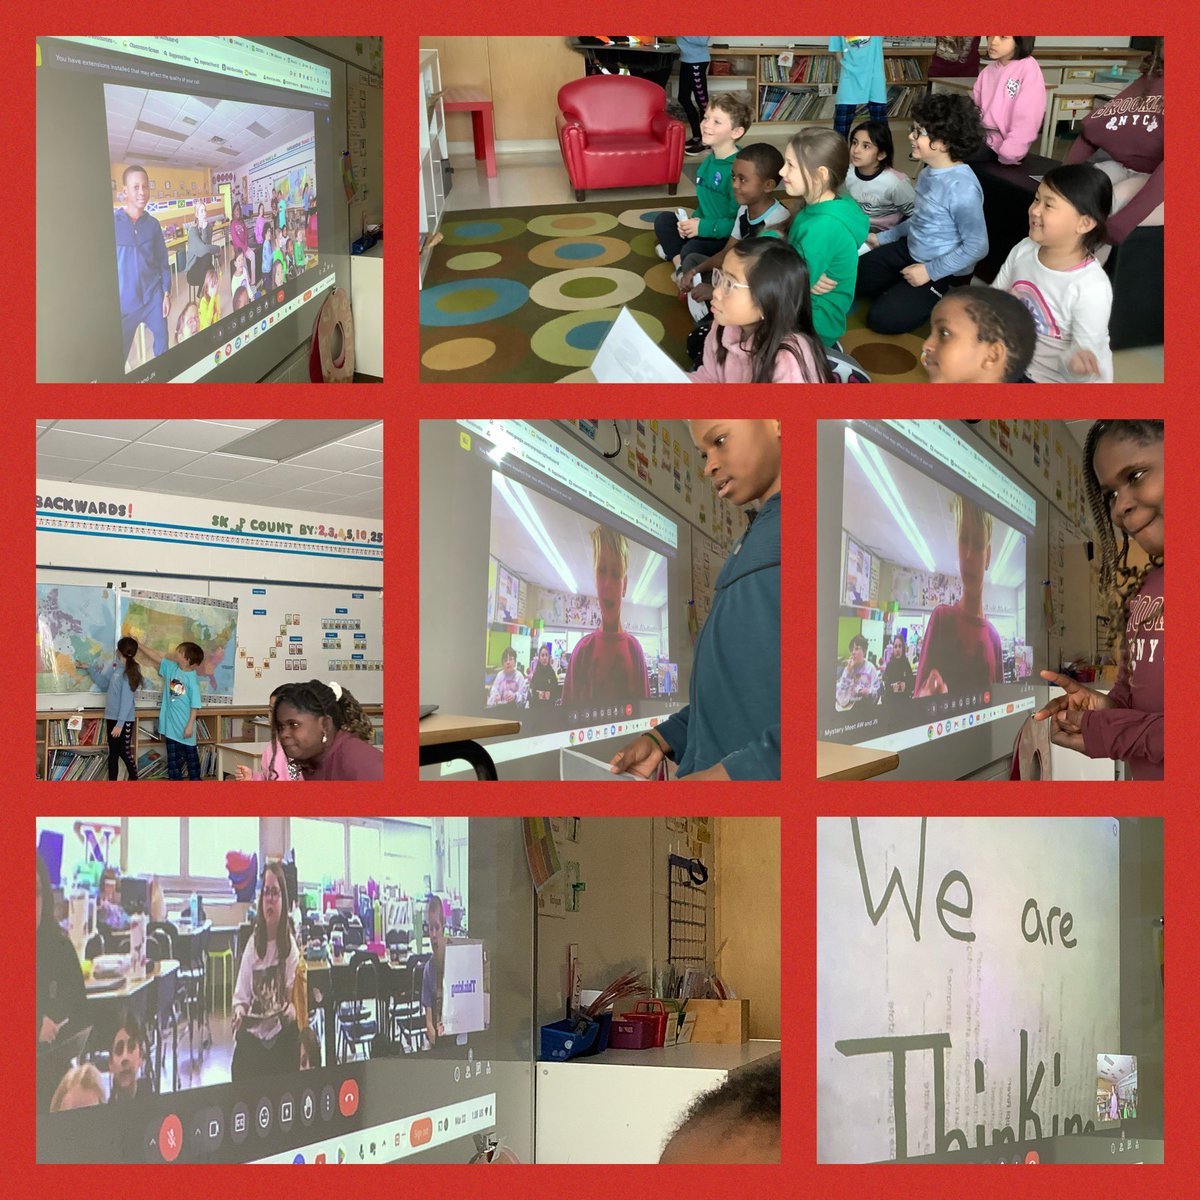 On Friday we had a #MysterySkype with @akweber16’s class in Massachusetts, USA. We loved it and we are learning more and more about Geography! So cool. @StAnneOCSB